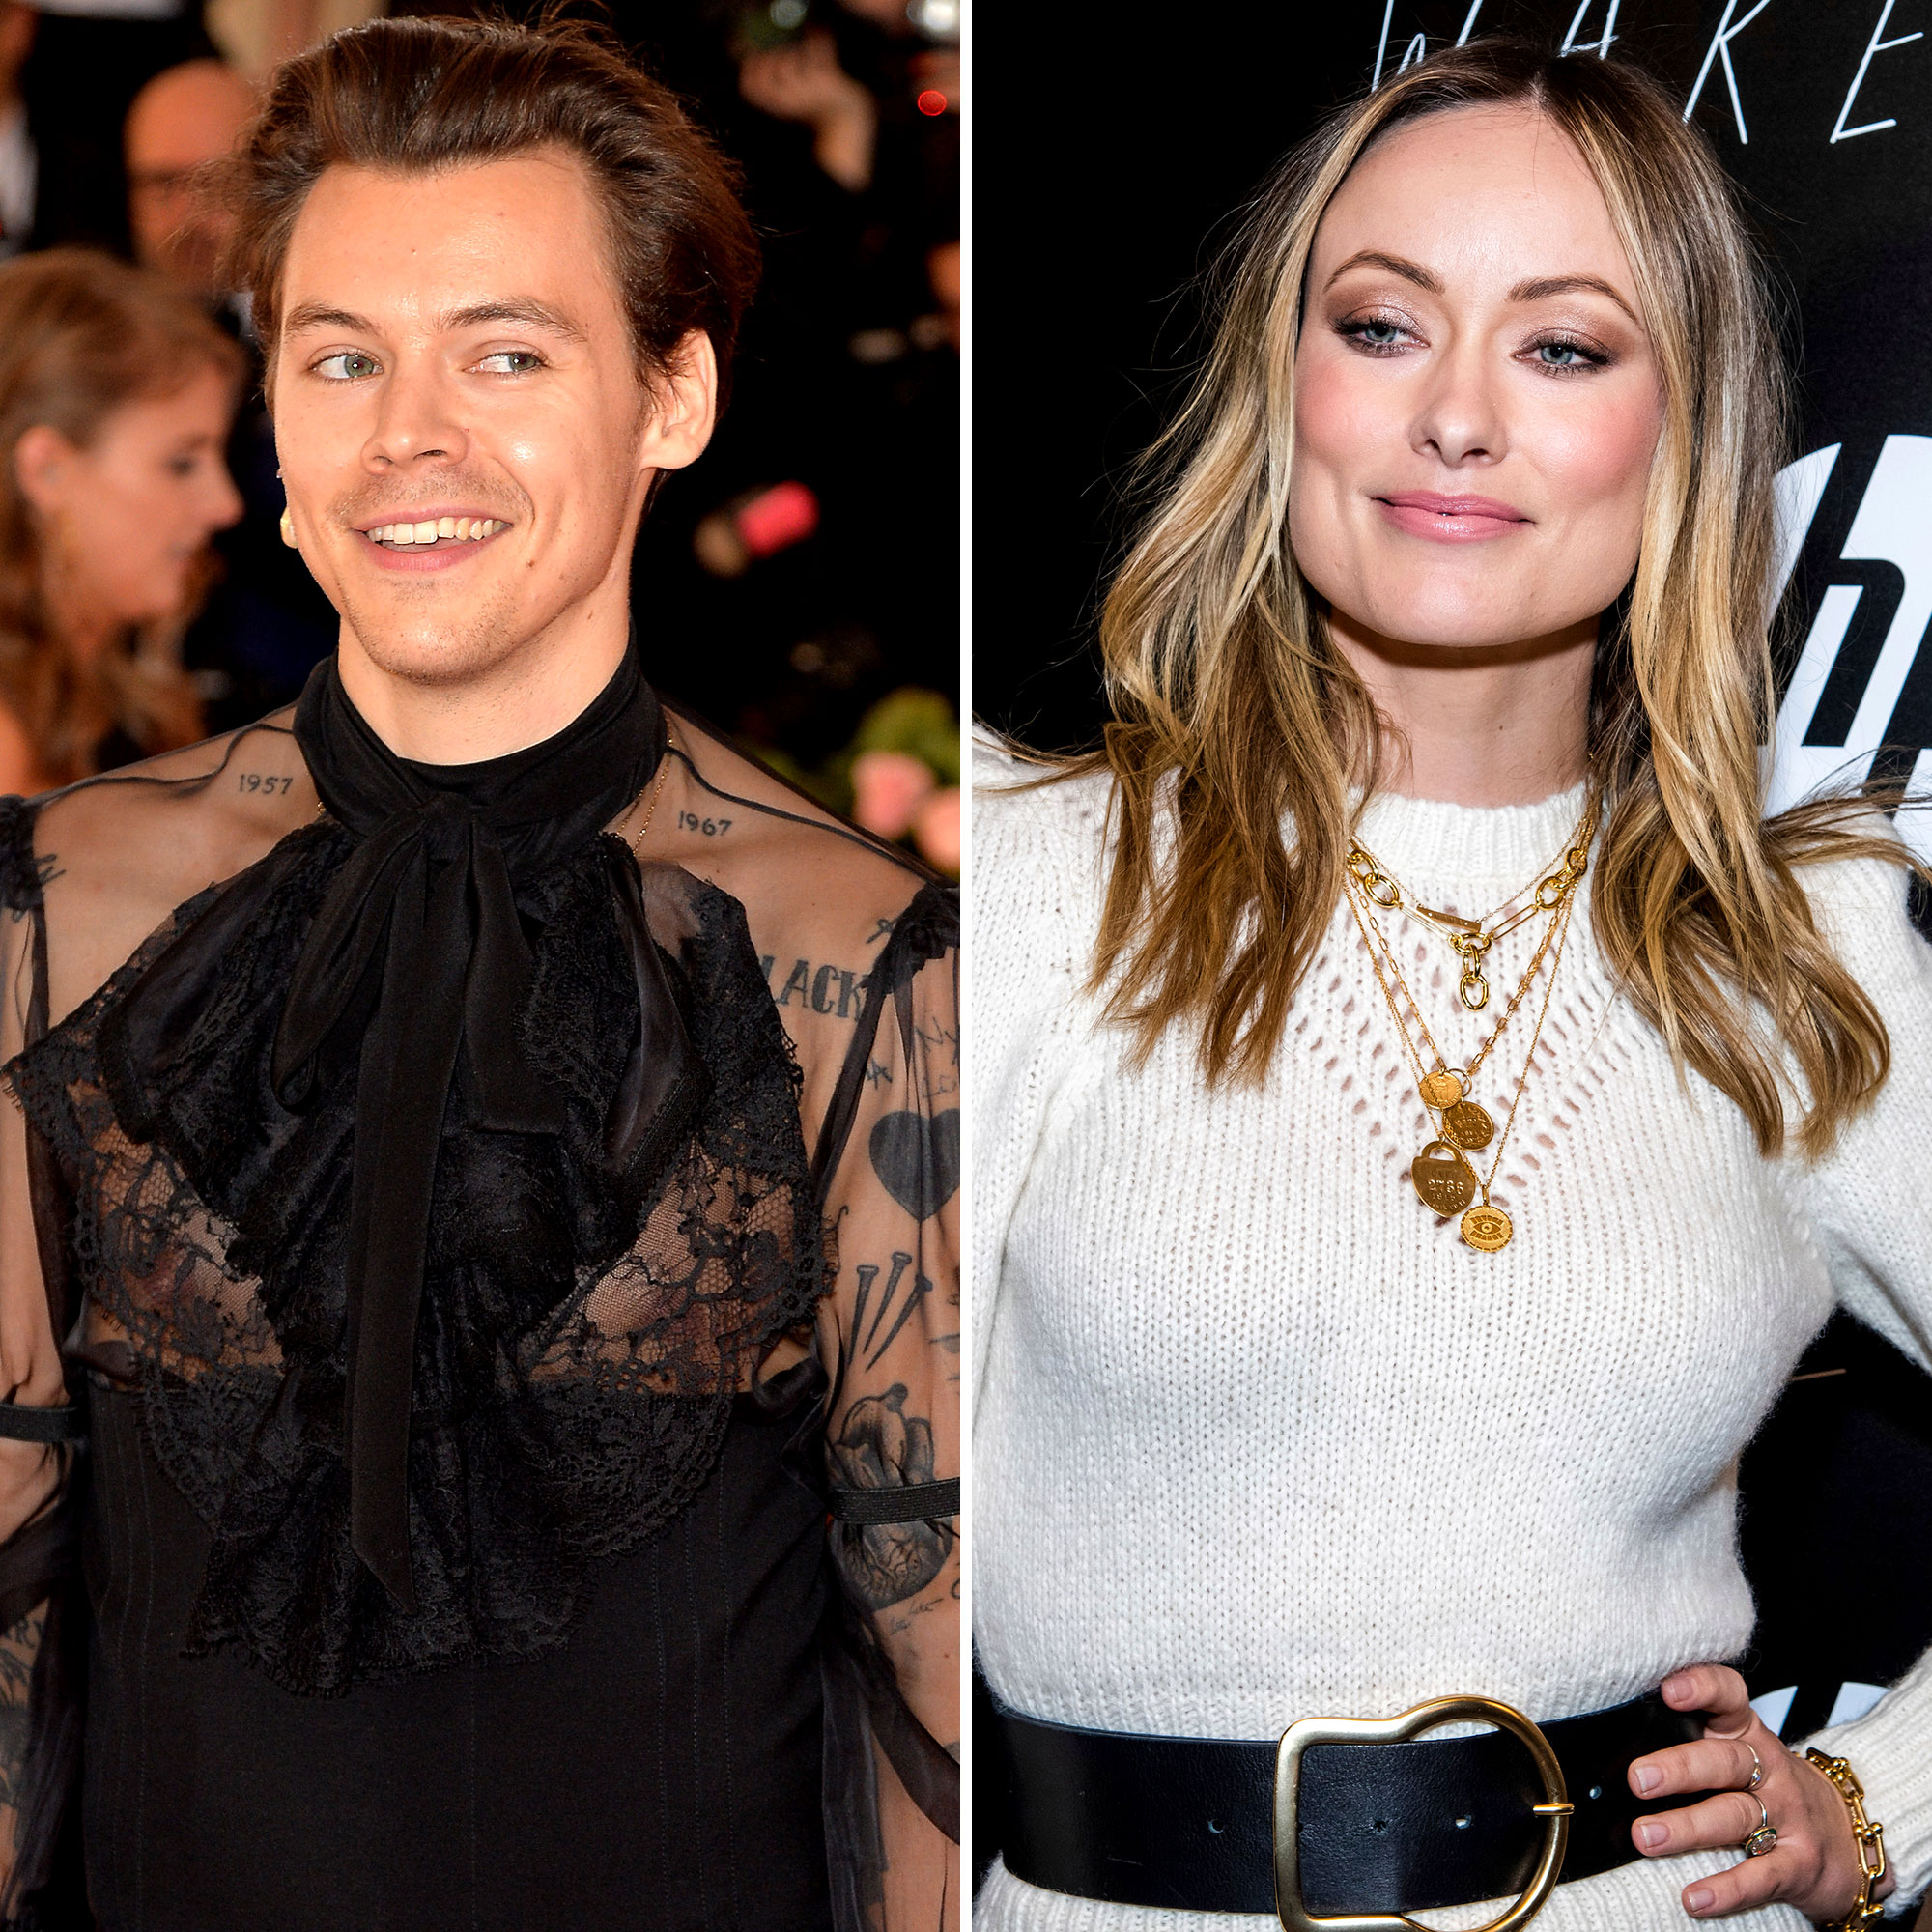 Don't Worry Darling' Drama: What Olivia Wilde, More Have Said